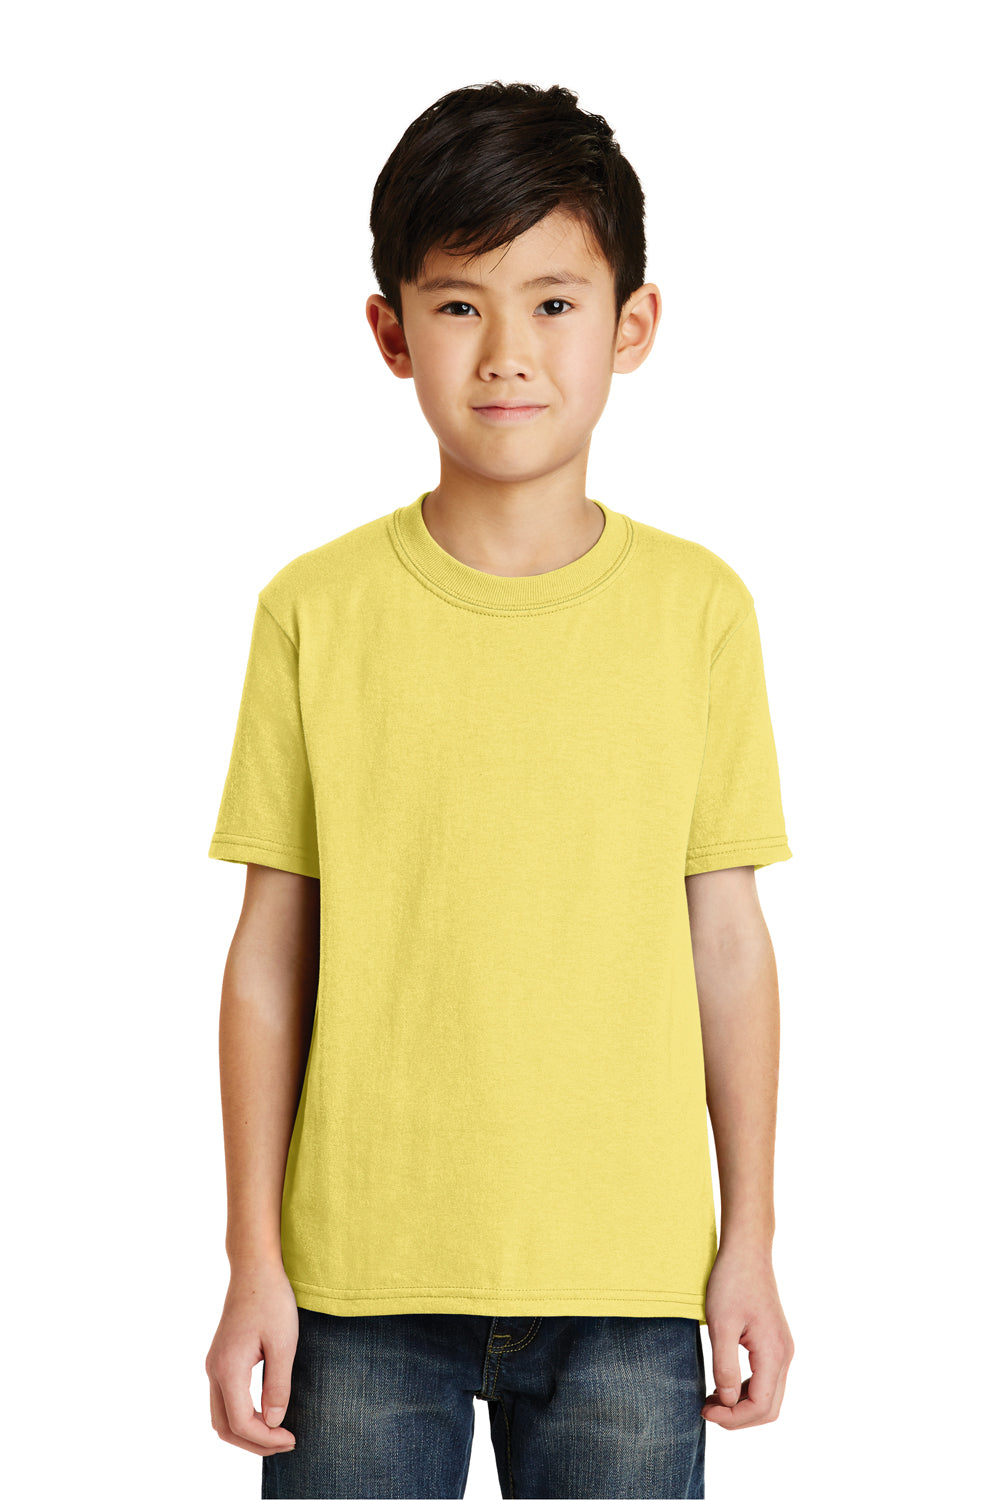 Port & Company PC55Y Youth Core Short Sleeve Crewneck T-Shirt Yellow Front